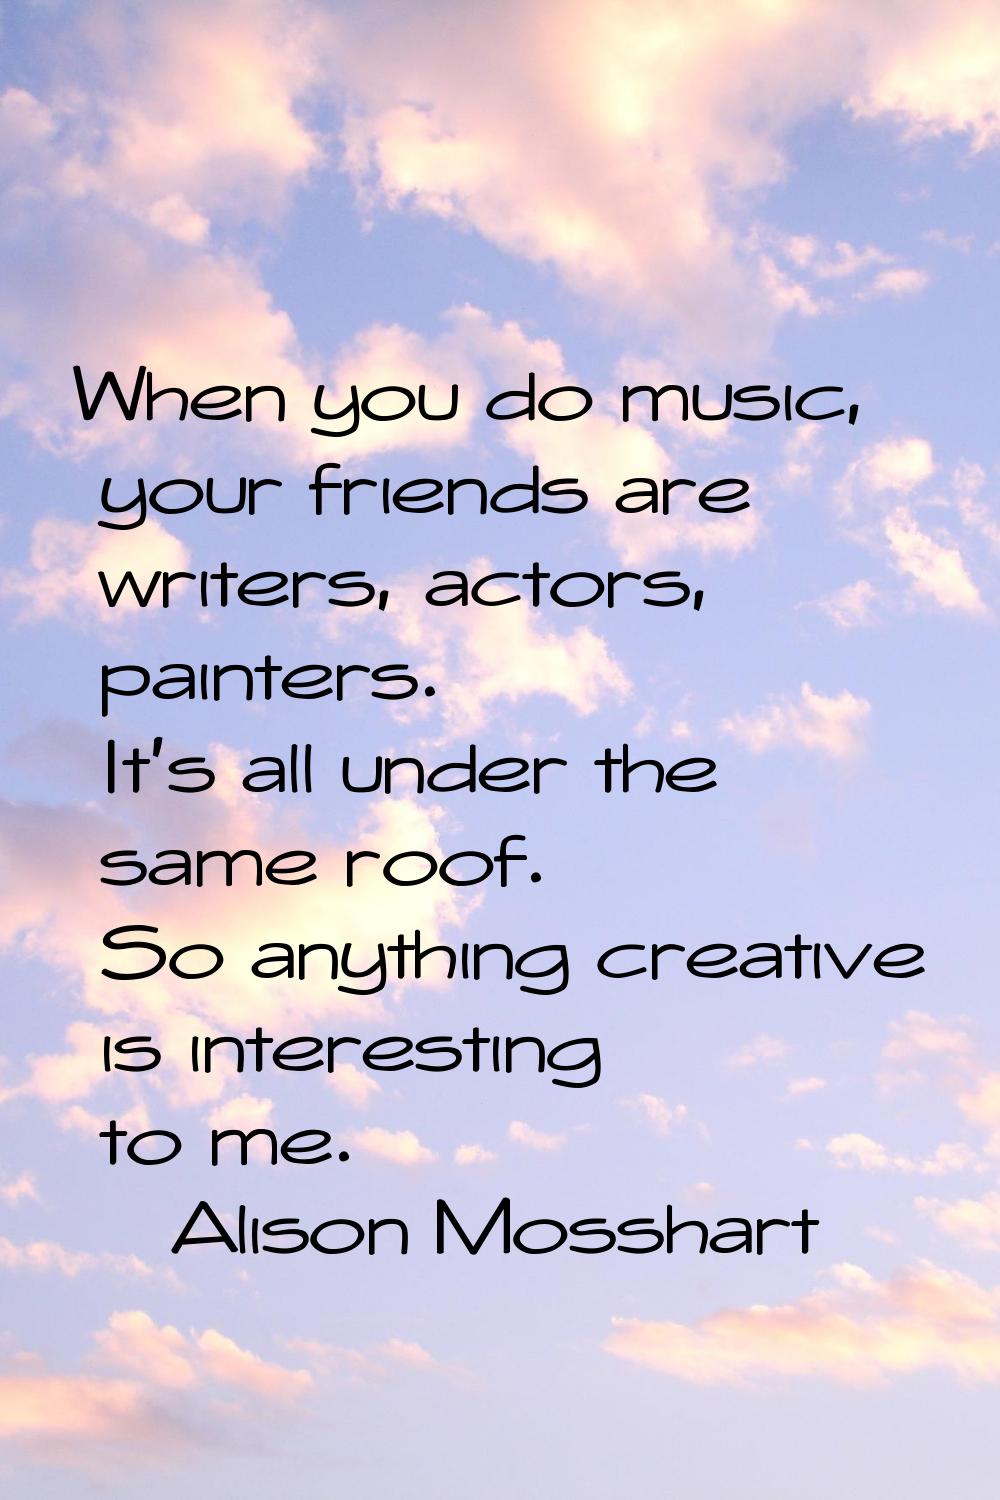 When you do music, your friends are writers, actors, painters. It's all under the same roof. So any